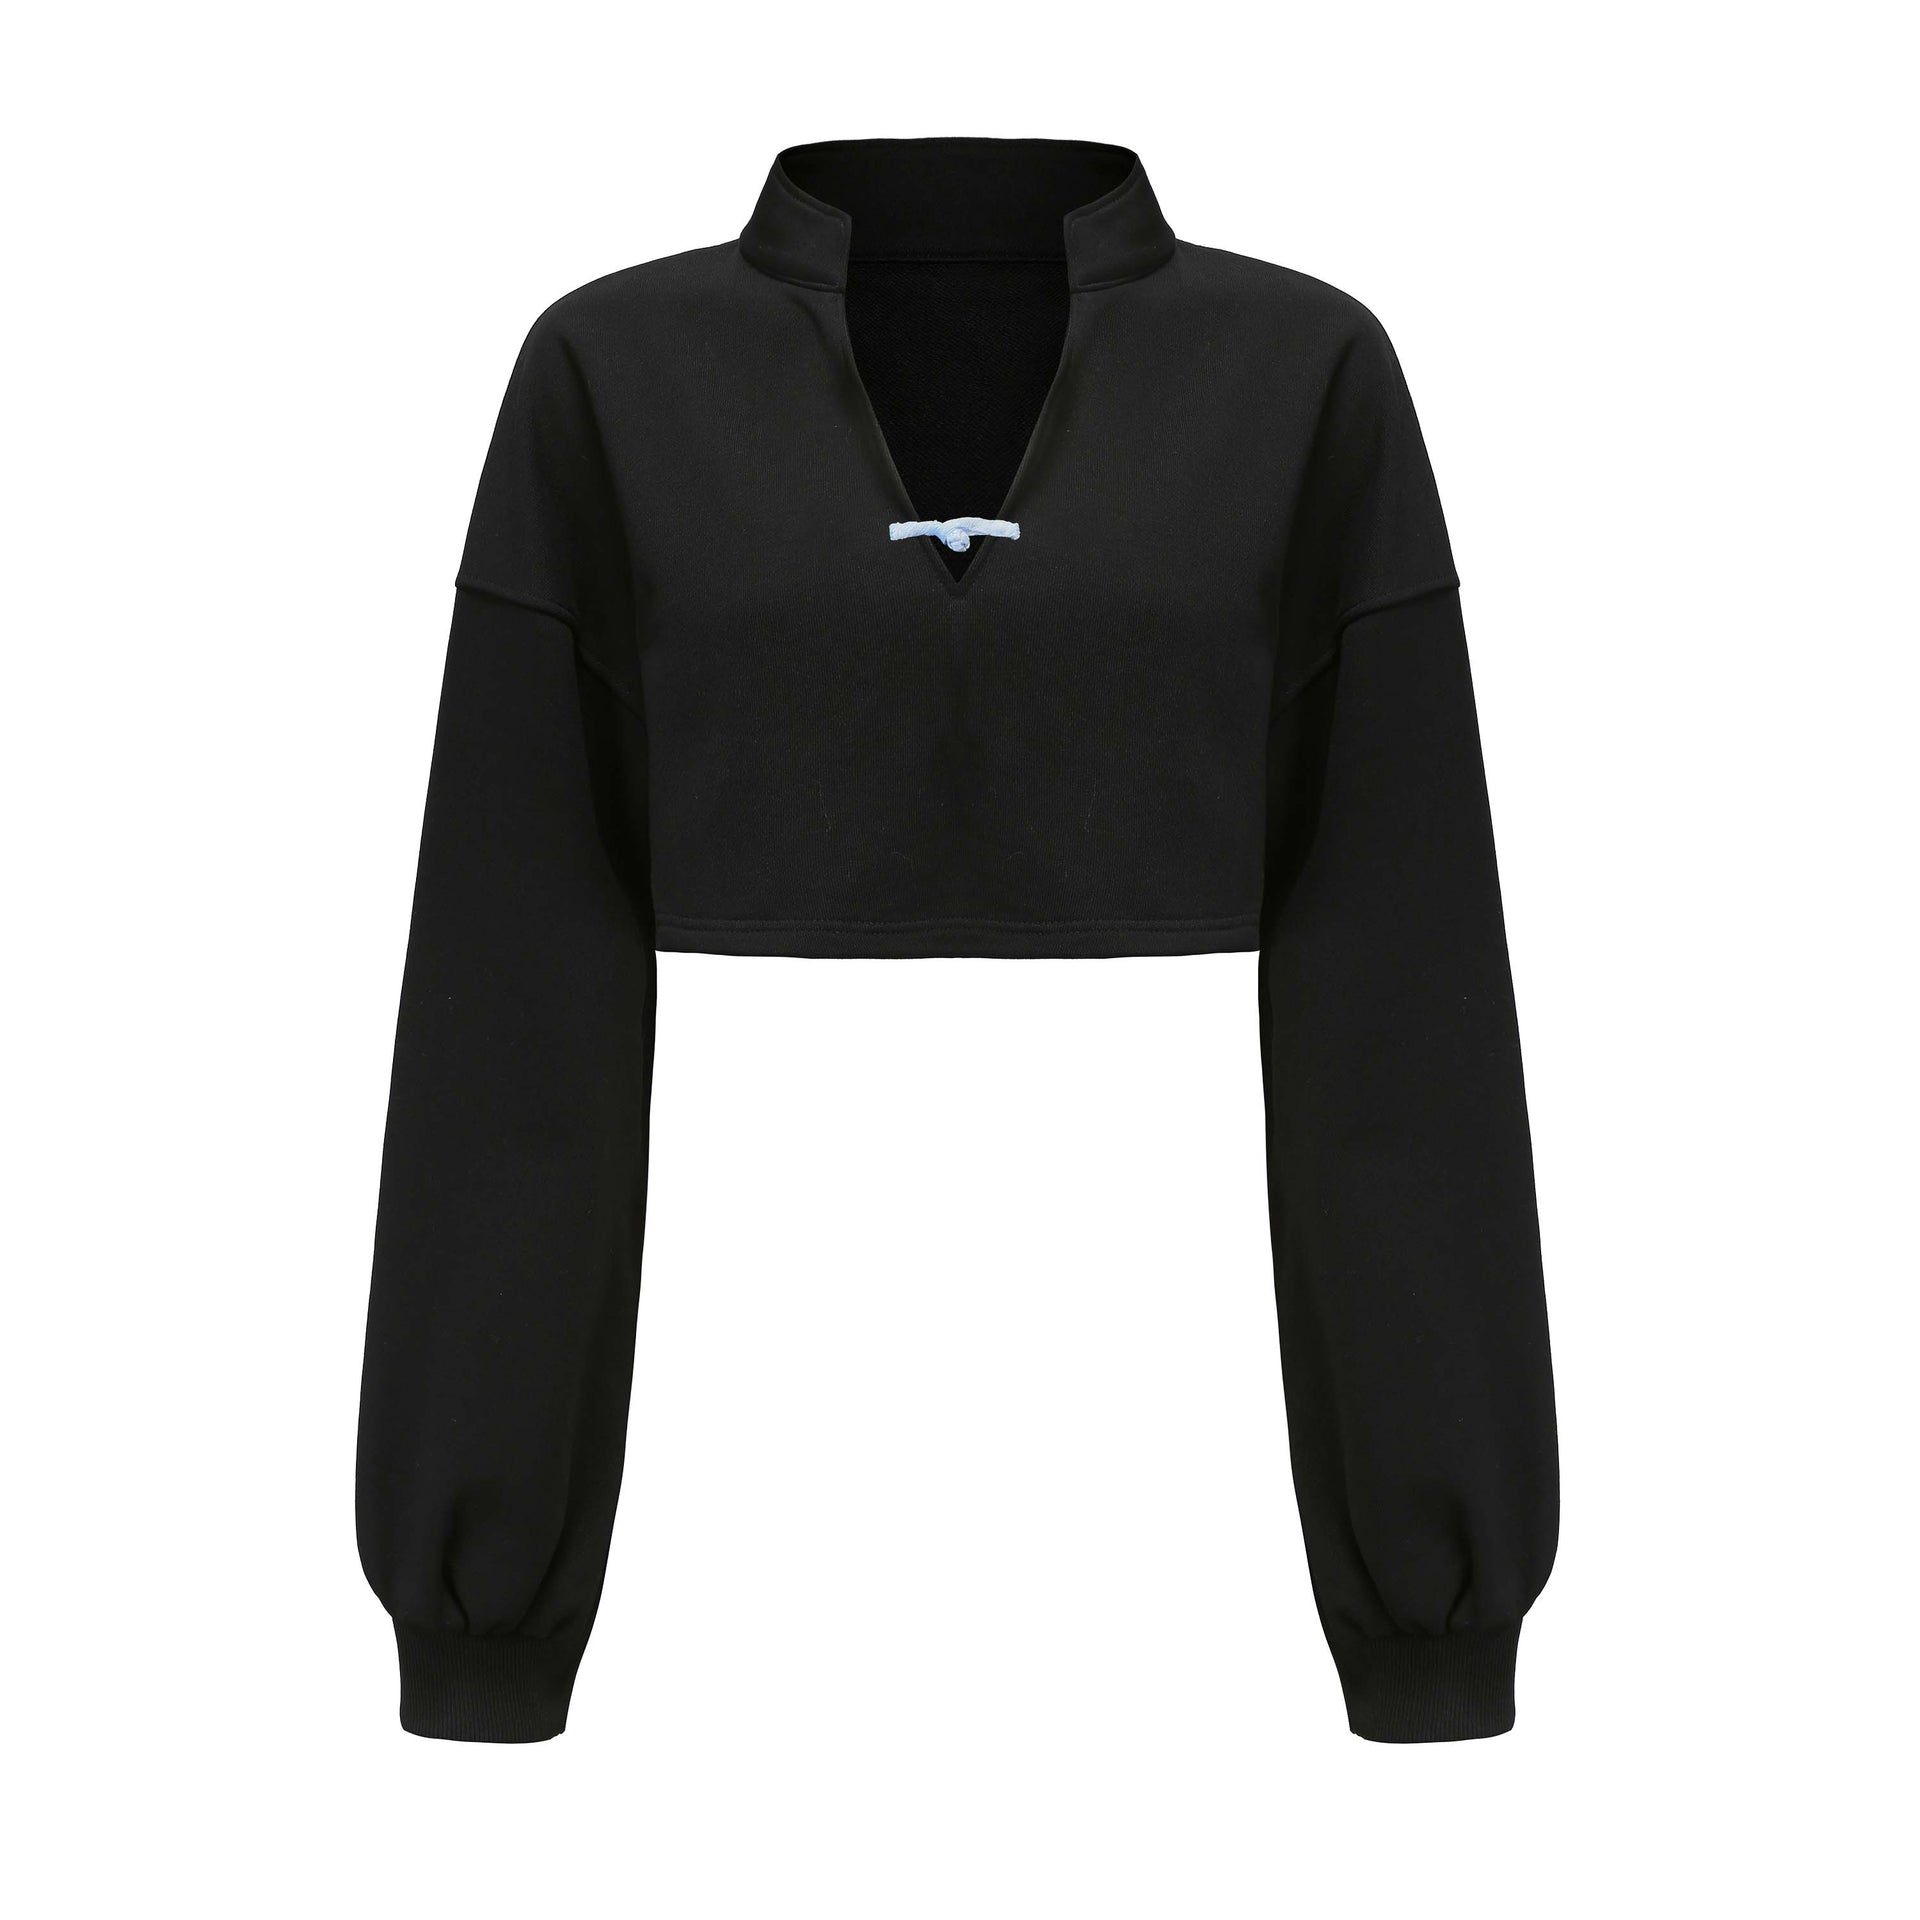 Hei Open Collar Crop Top, Drop Shoulder Oversized Fit, Contrast Color Piping, Center Front Knot Button, Cotton Black, front